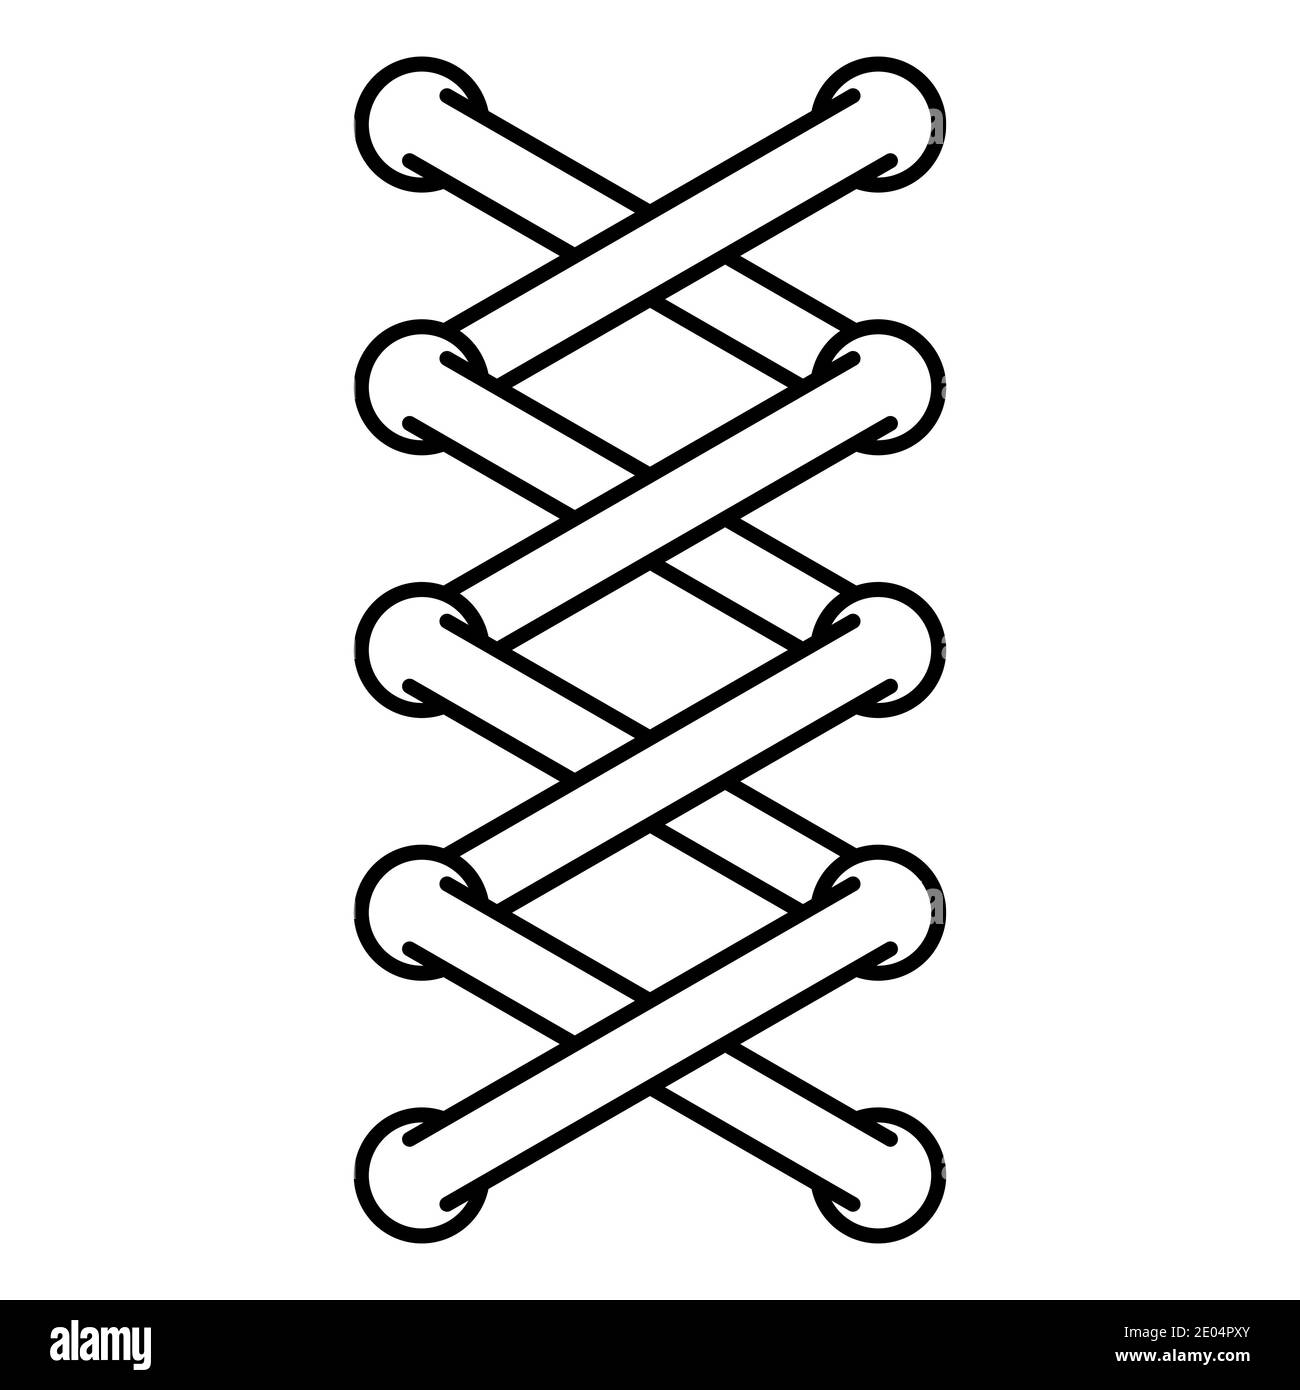 Shoelace shoes, linking laces fastening rope stitch concept, vector diagrams shoelaces, icon lace shoe Stock Vector